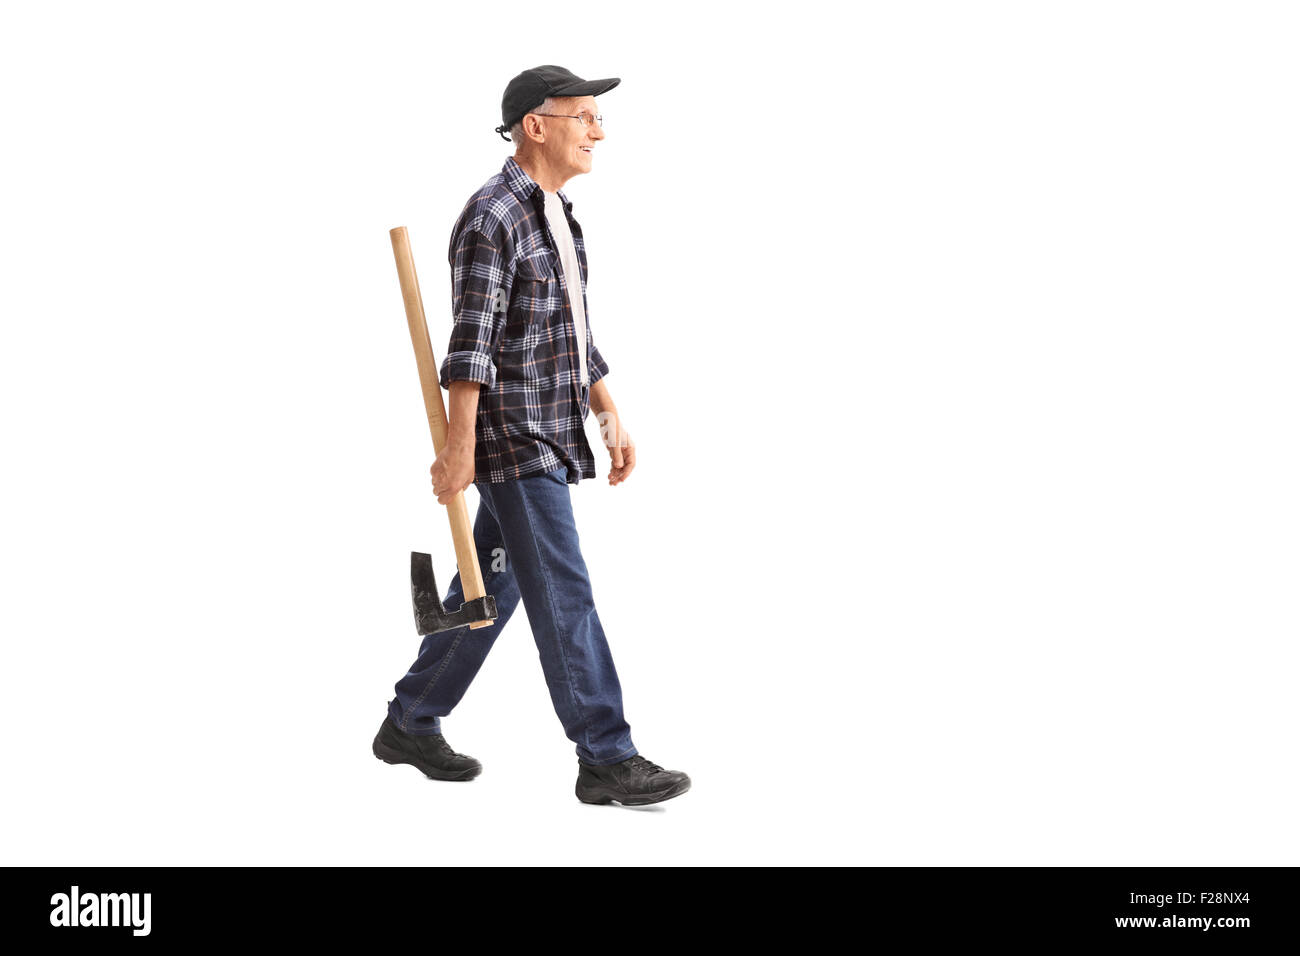 Full length profile shot of a senior man holding an ax and walking isolated on white background Stock Photo